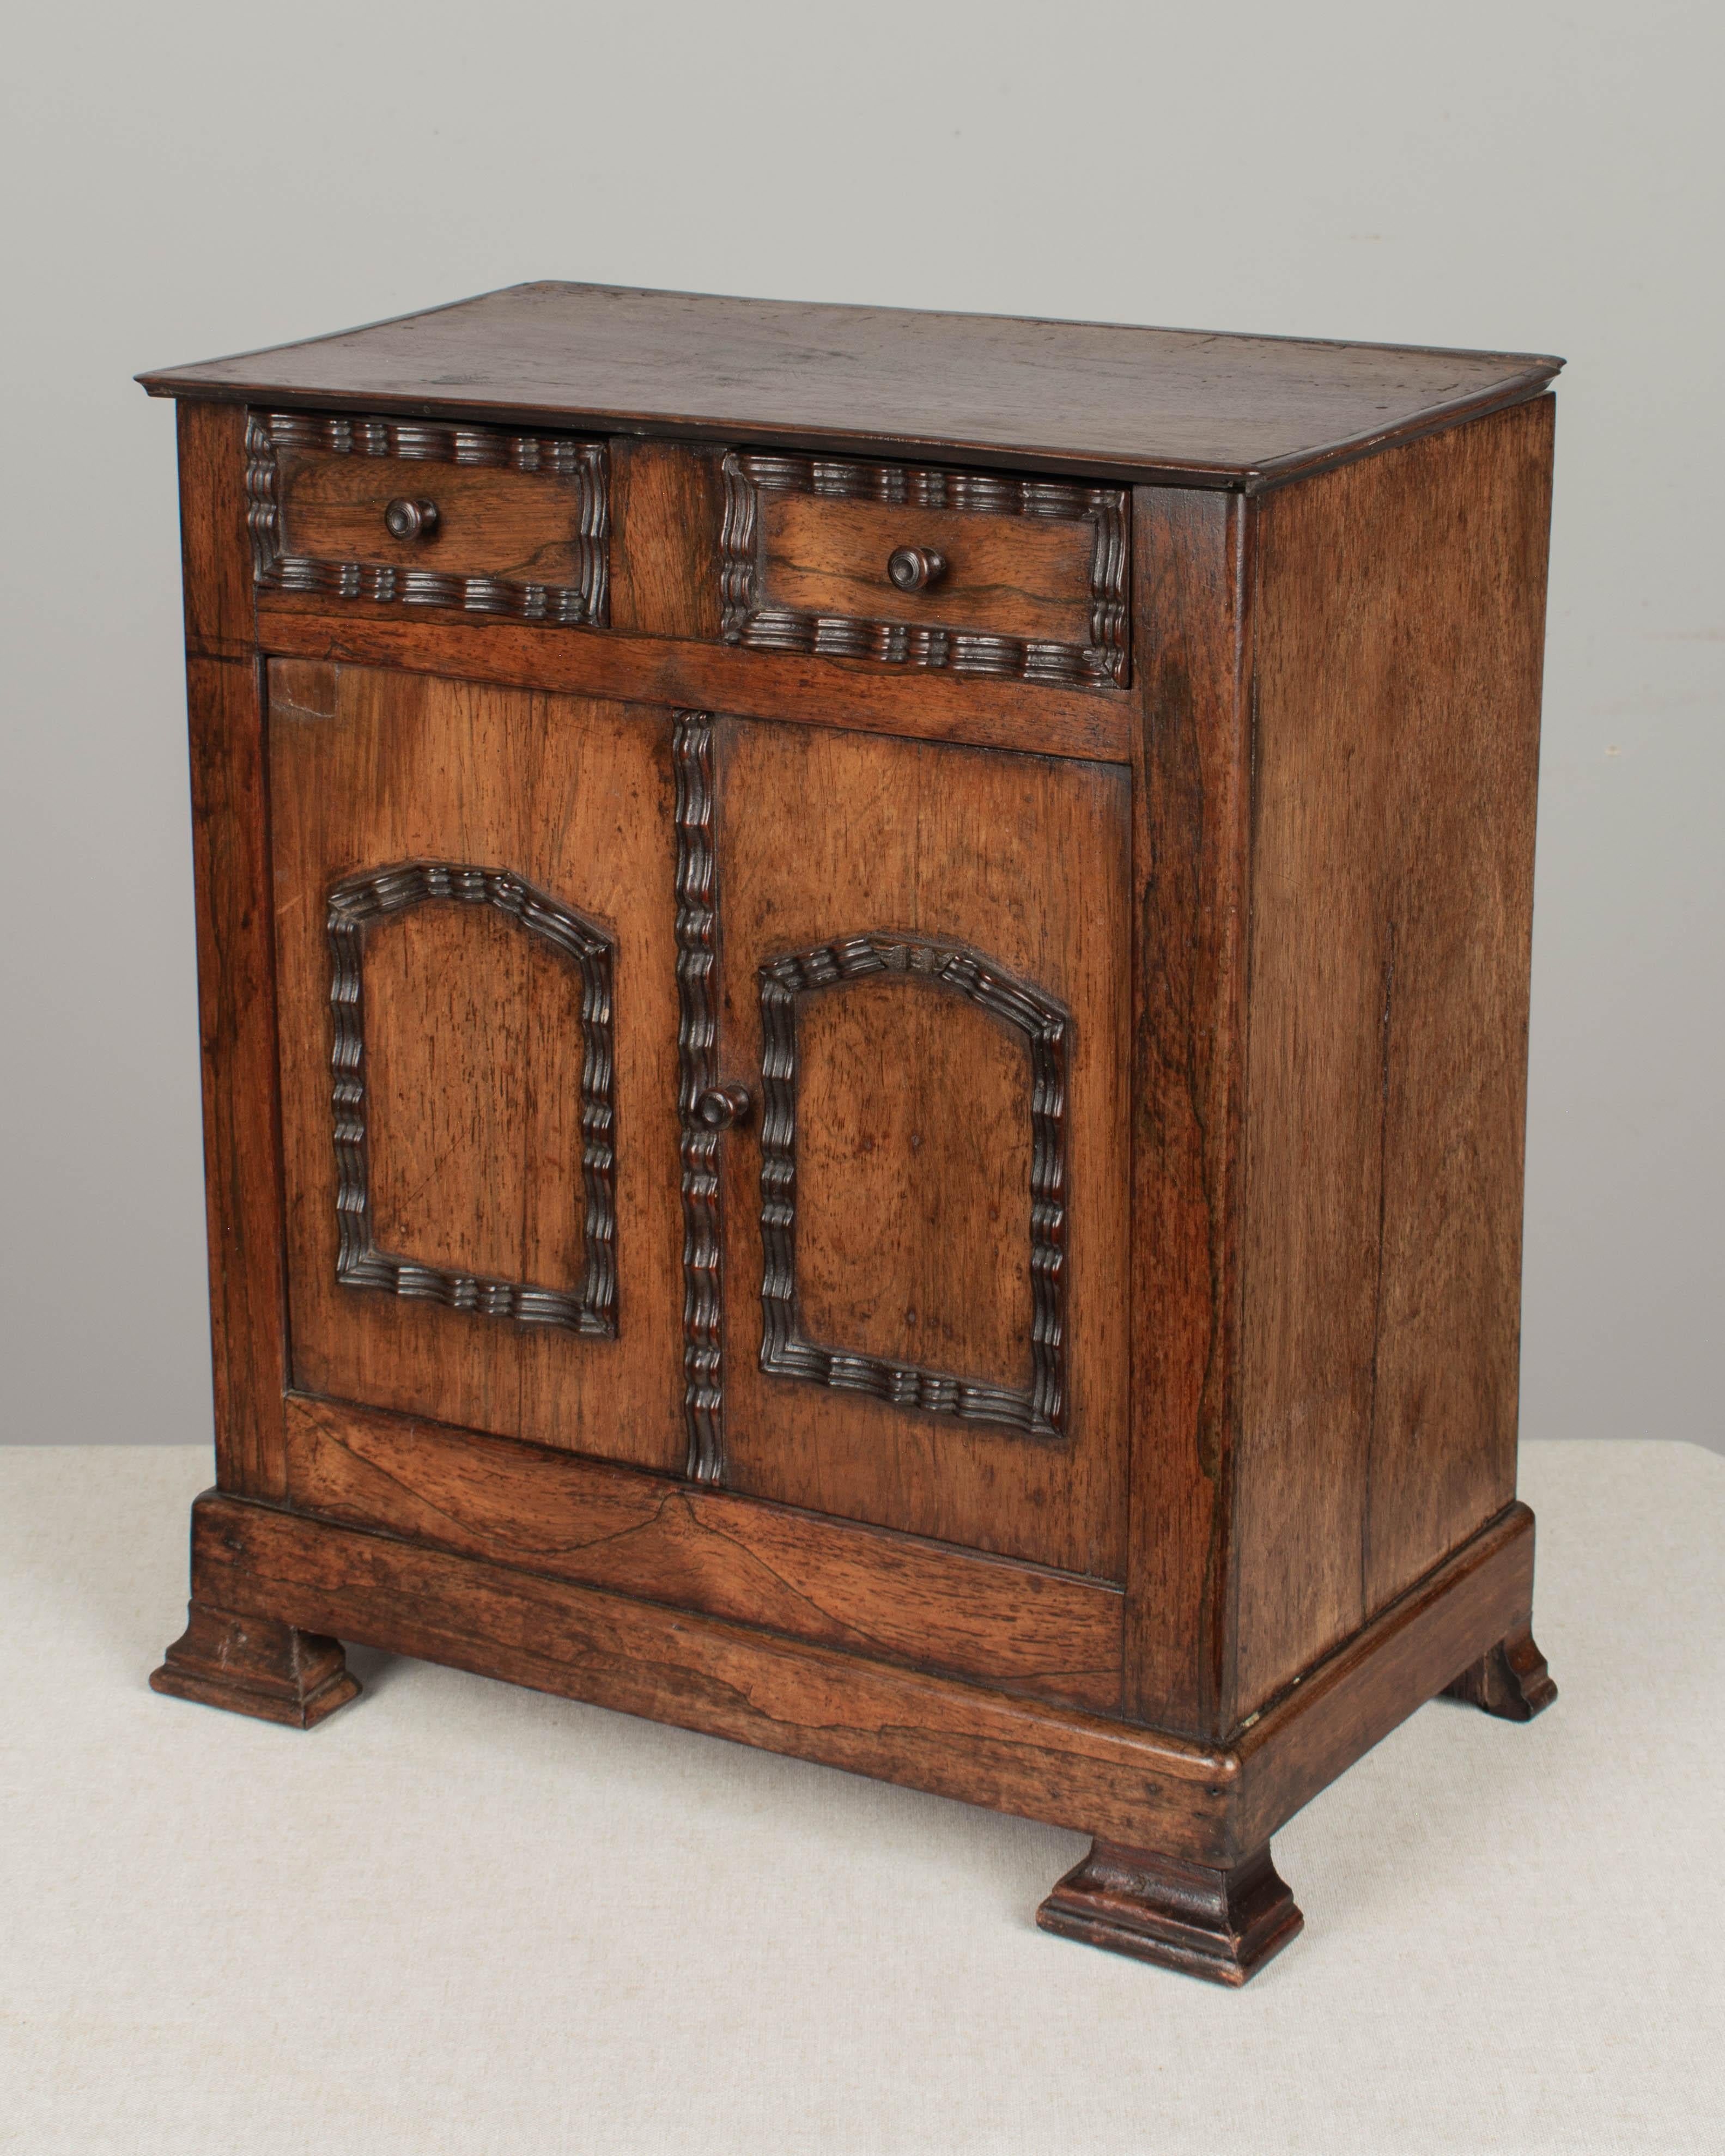 A late 19th c. French miniature doll furniture buffet made of walnut with rosewood trim and oak as a secondary wood. Two small dovetailed drawers above cabinet doors opening to an interior with a single shelf. In good condition with a small split on